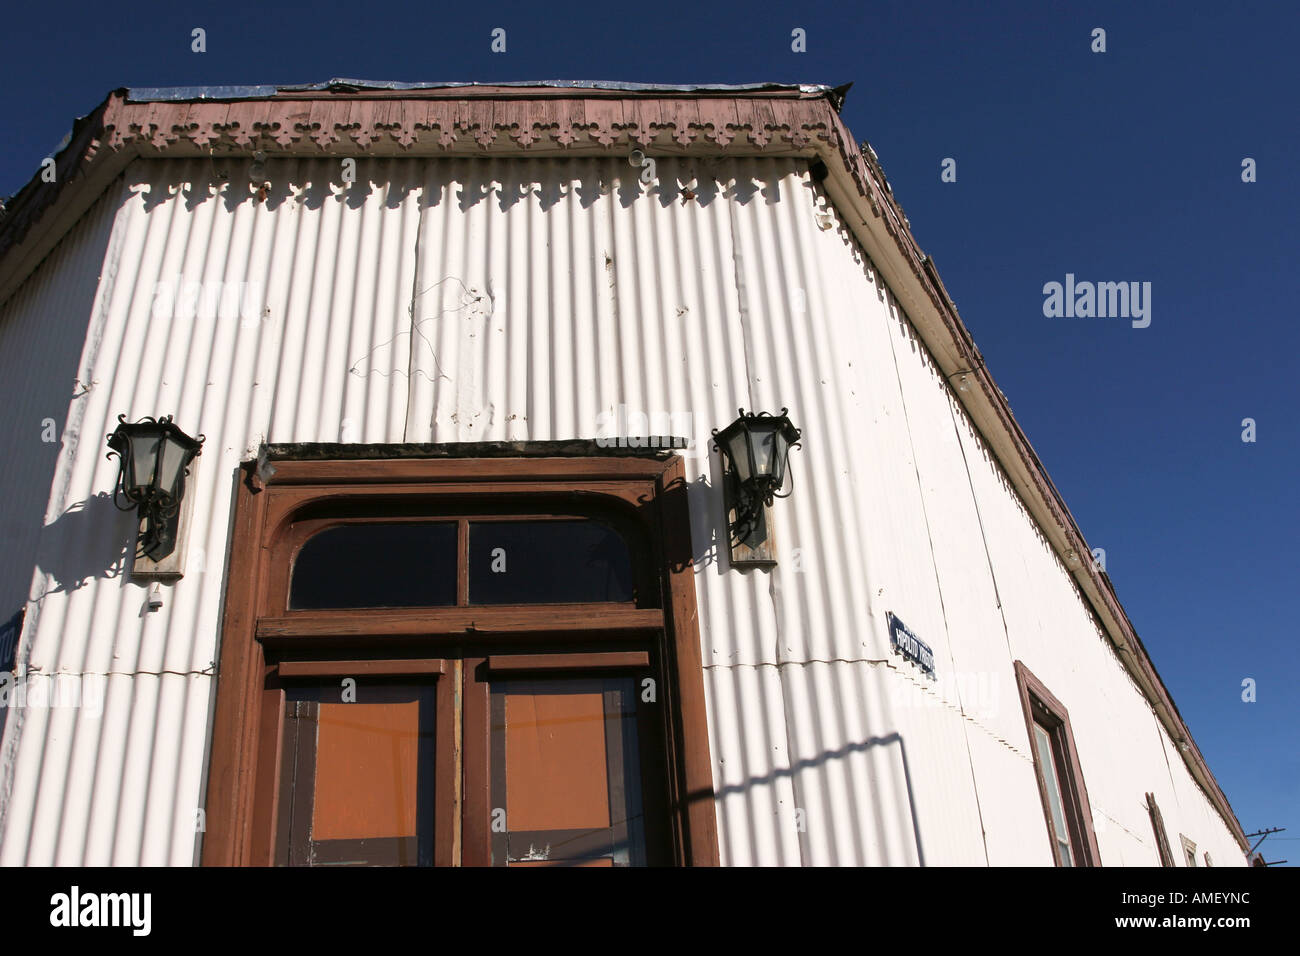 Old train station in Patagonia Argentina with zinc metal walls Stock Photo